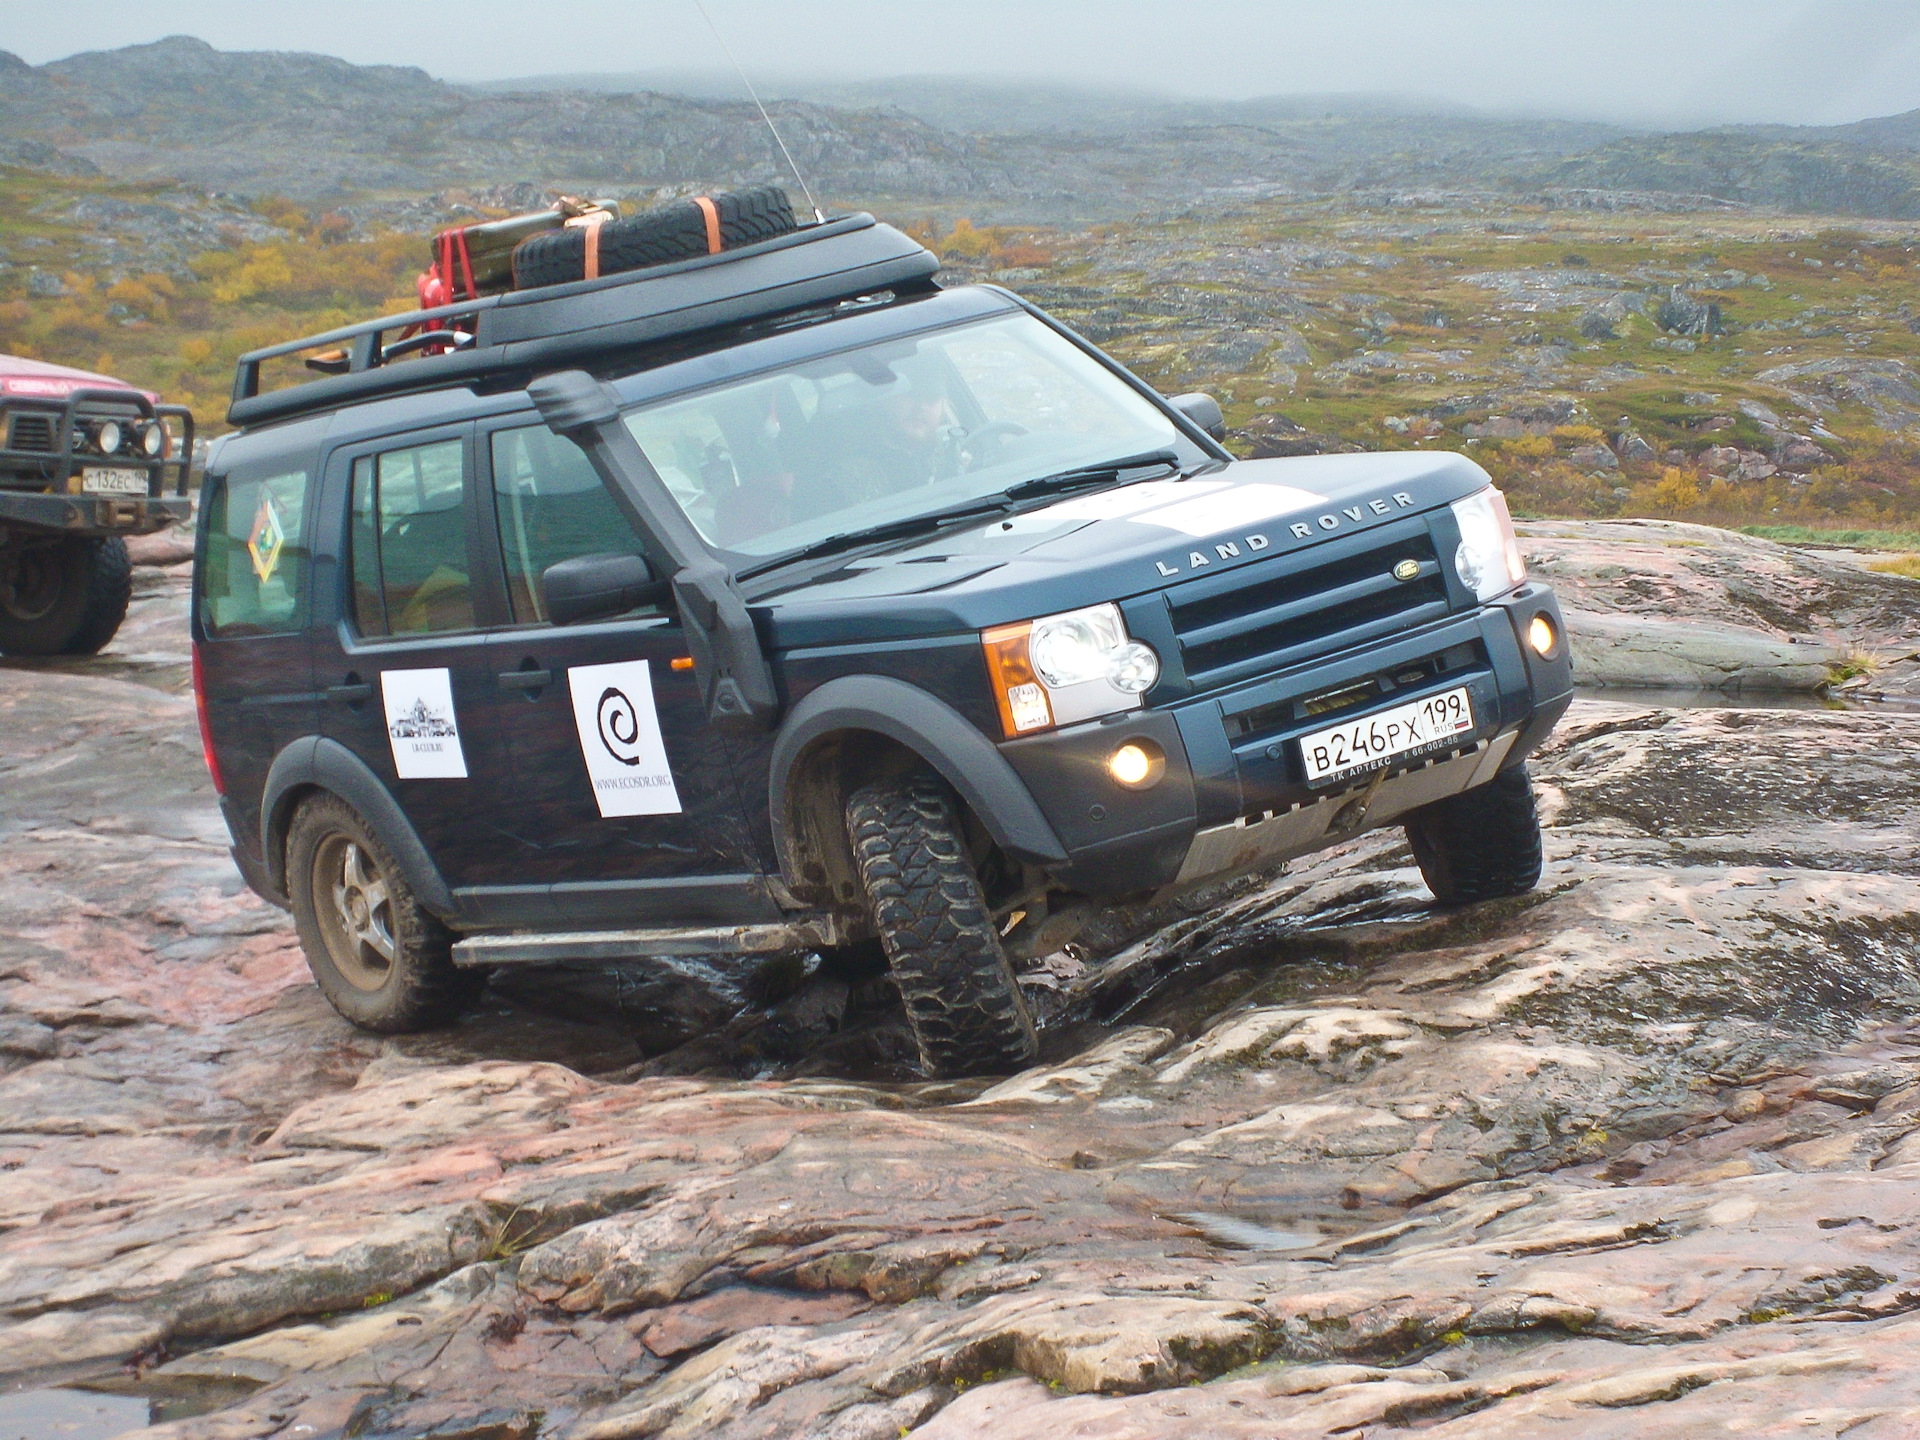 Дискавери войны. Land Rover Discovery 3 Offroad. Ленд Ровер Дискавери 4 Expedition. Land Rover Discovery 4 Экспедиция. Ленд Ровер Дискавери 2 Expedition.